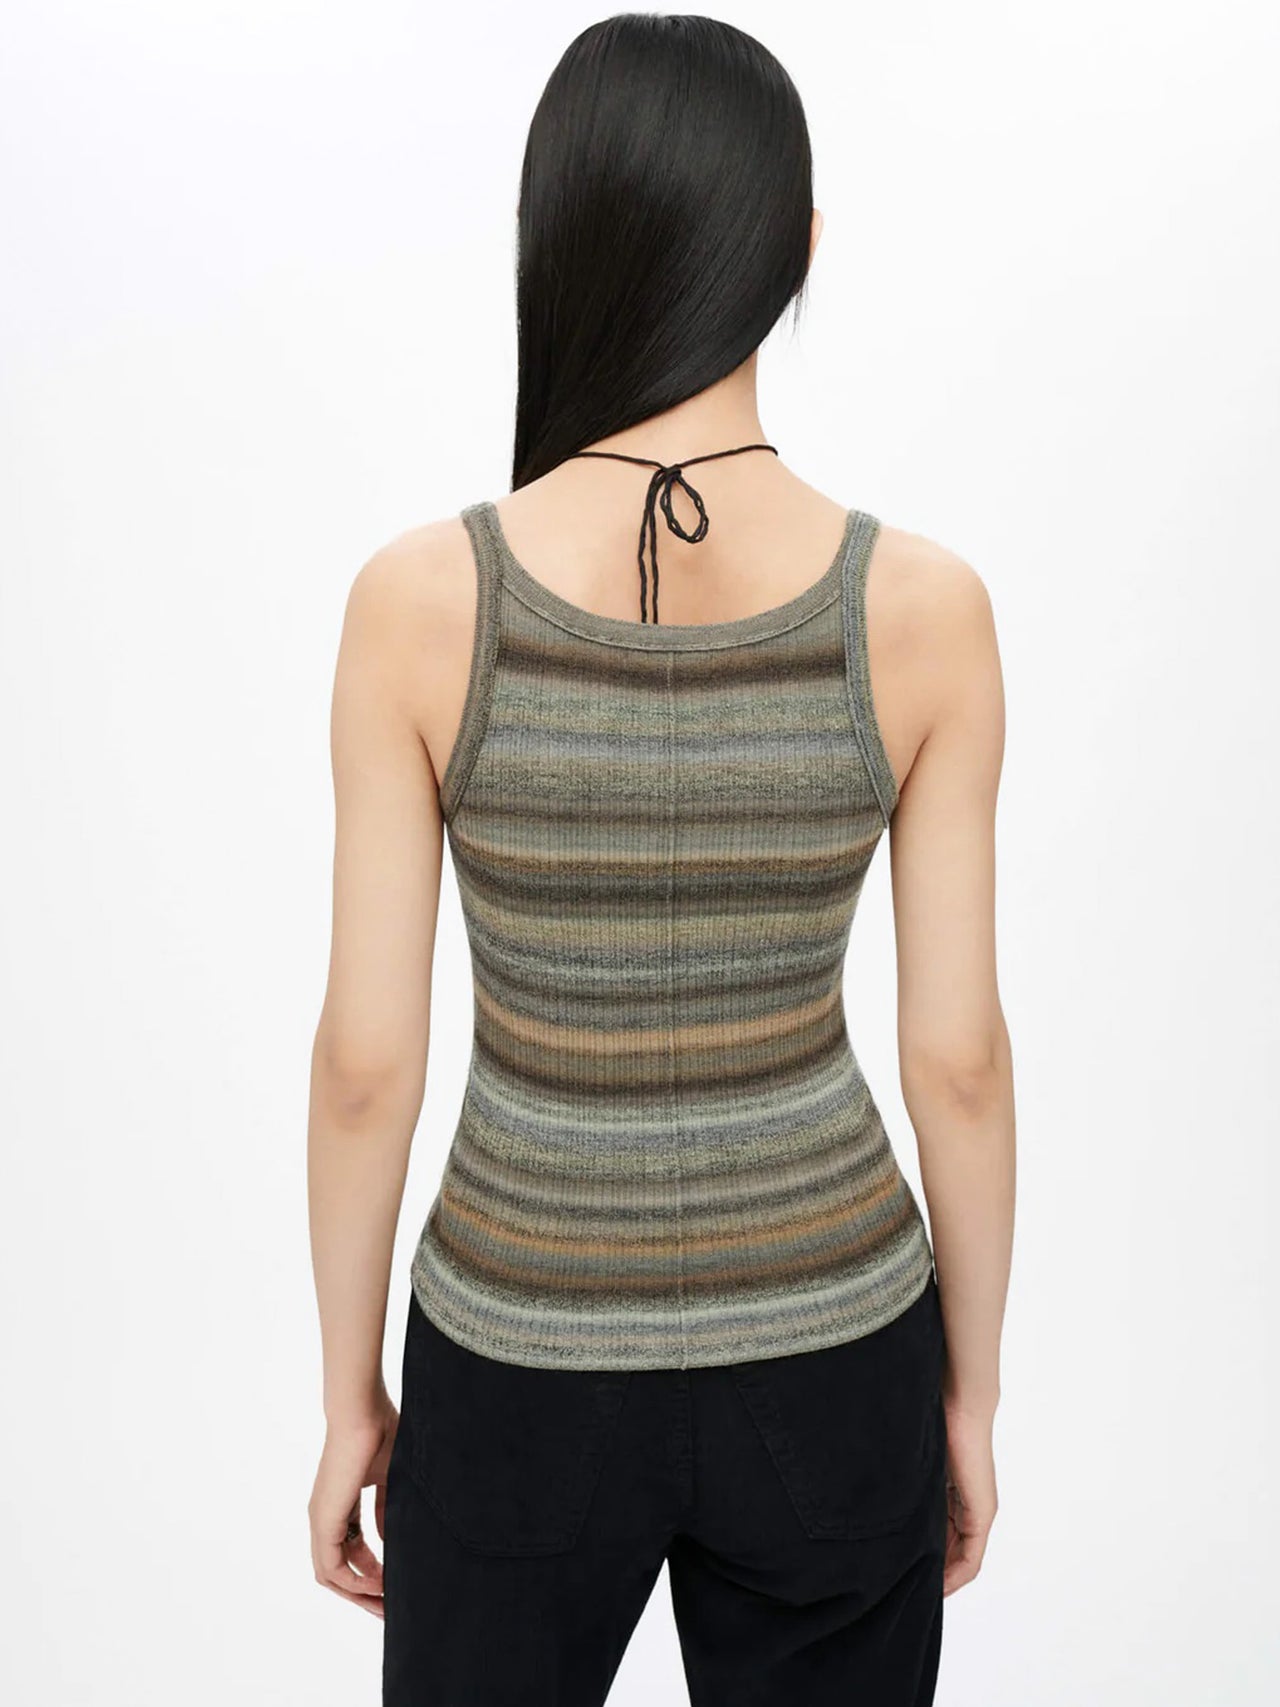 redone-ribbed-top-grey-space-dye